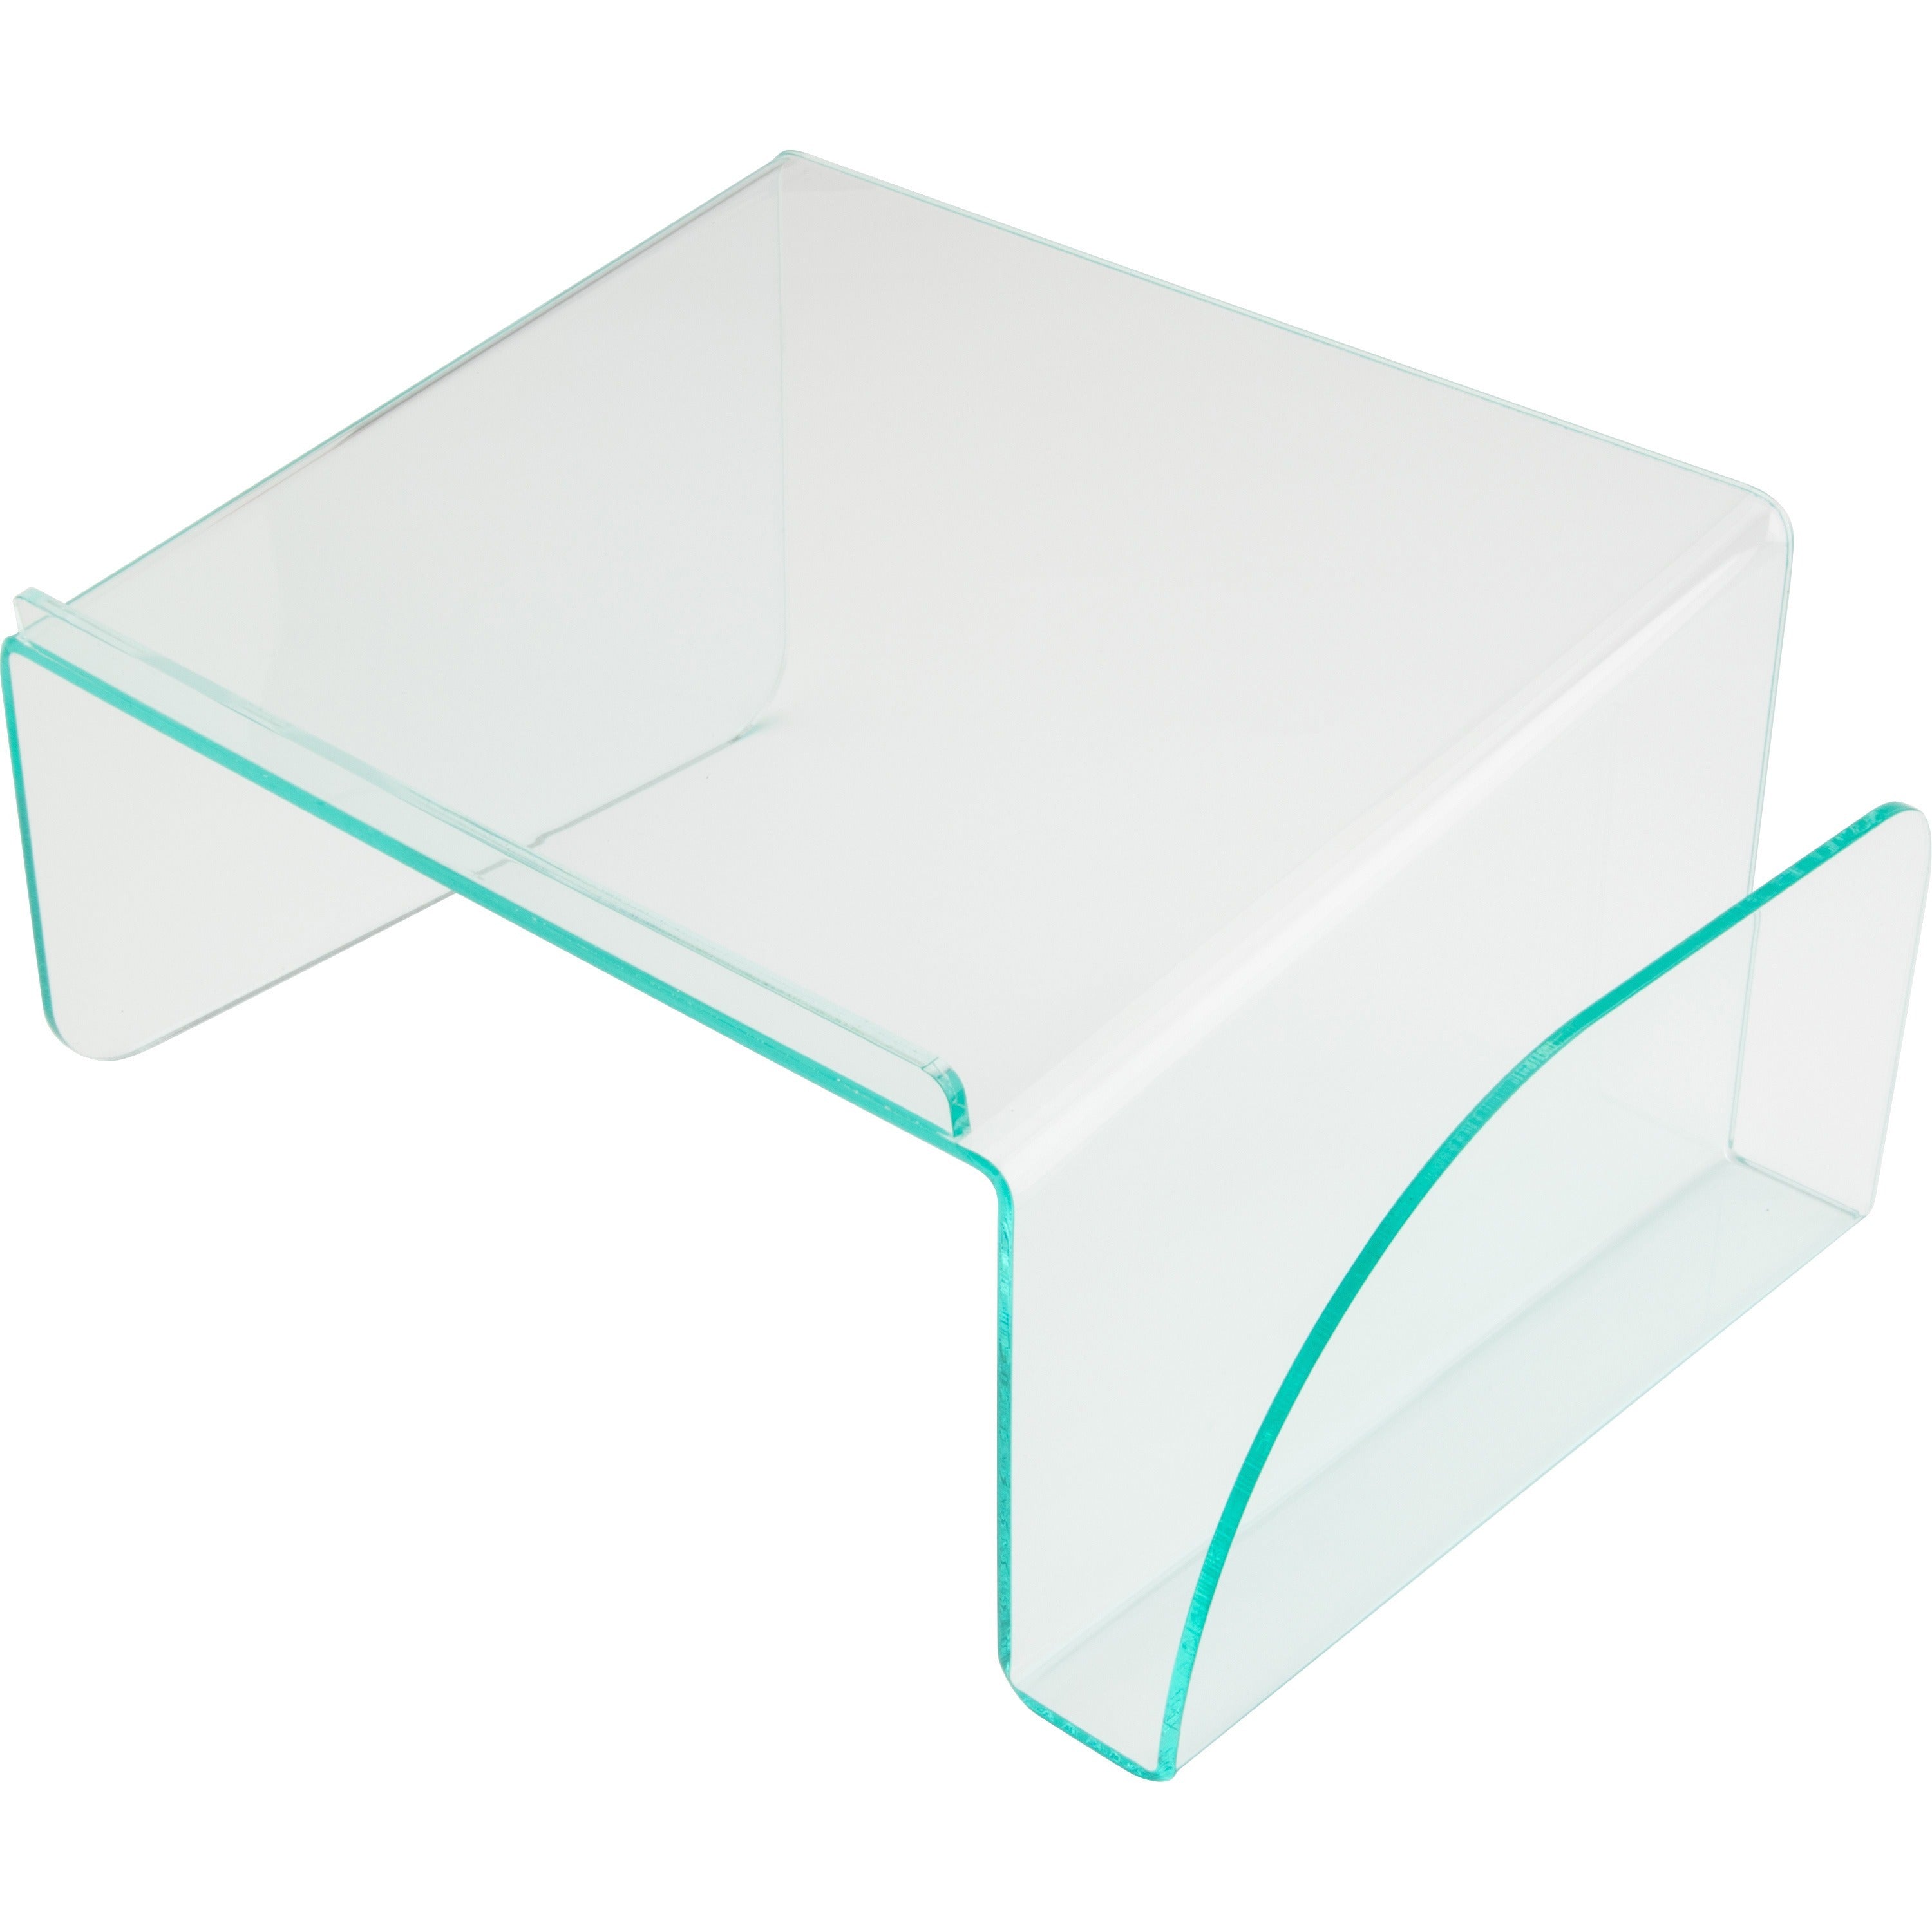 Lorell Phone Stand - 5.5" Height x 11" Width x 10" Depth - Acrylic - Clear, Green - 